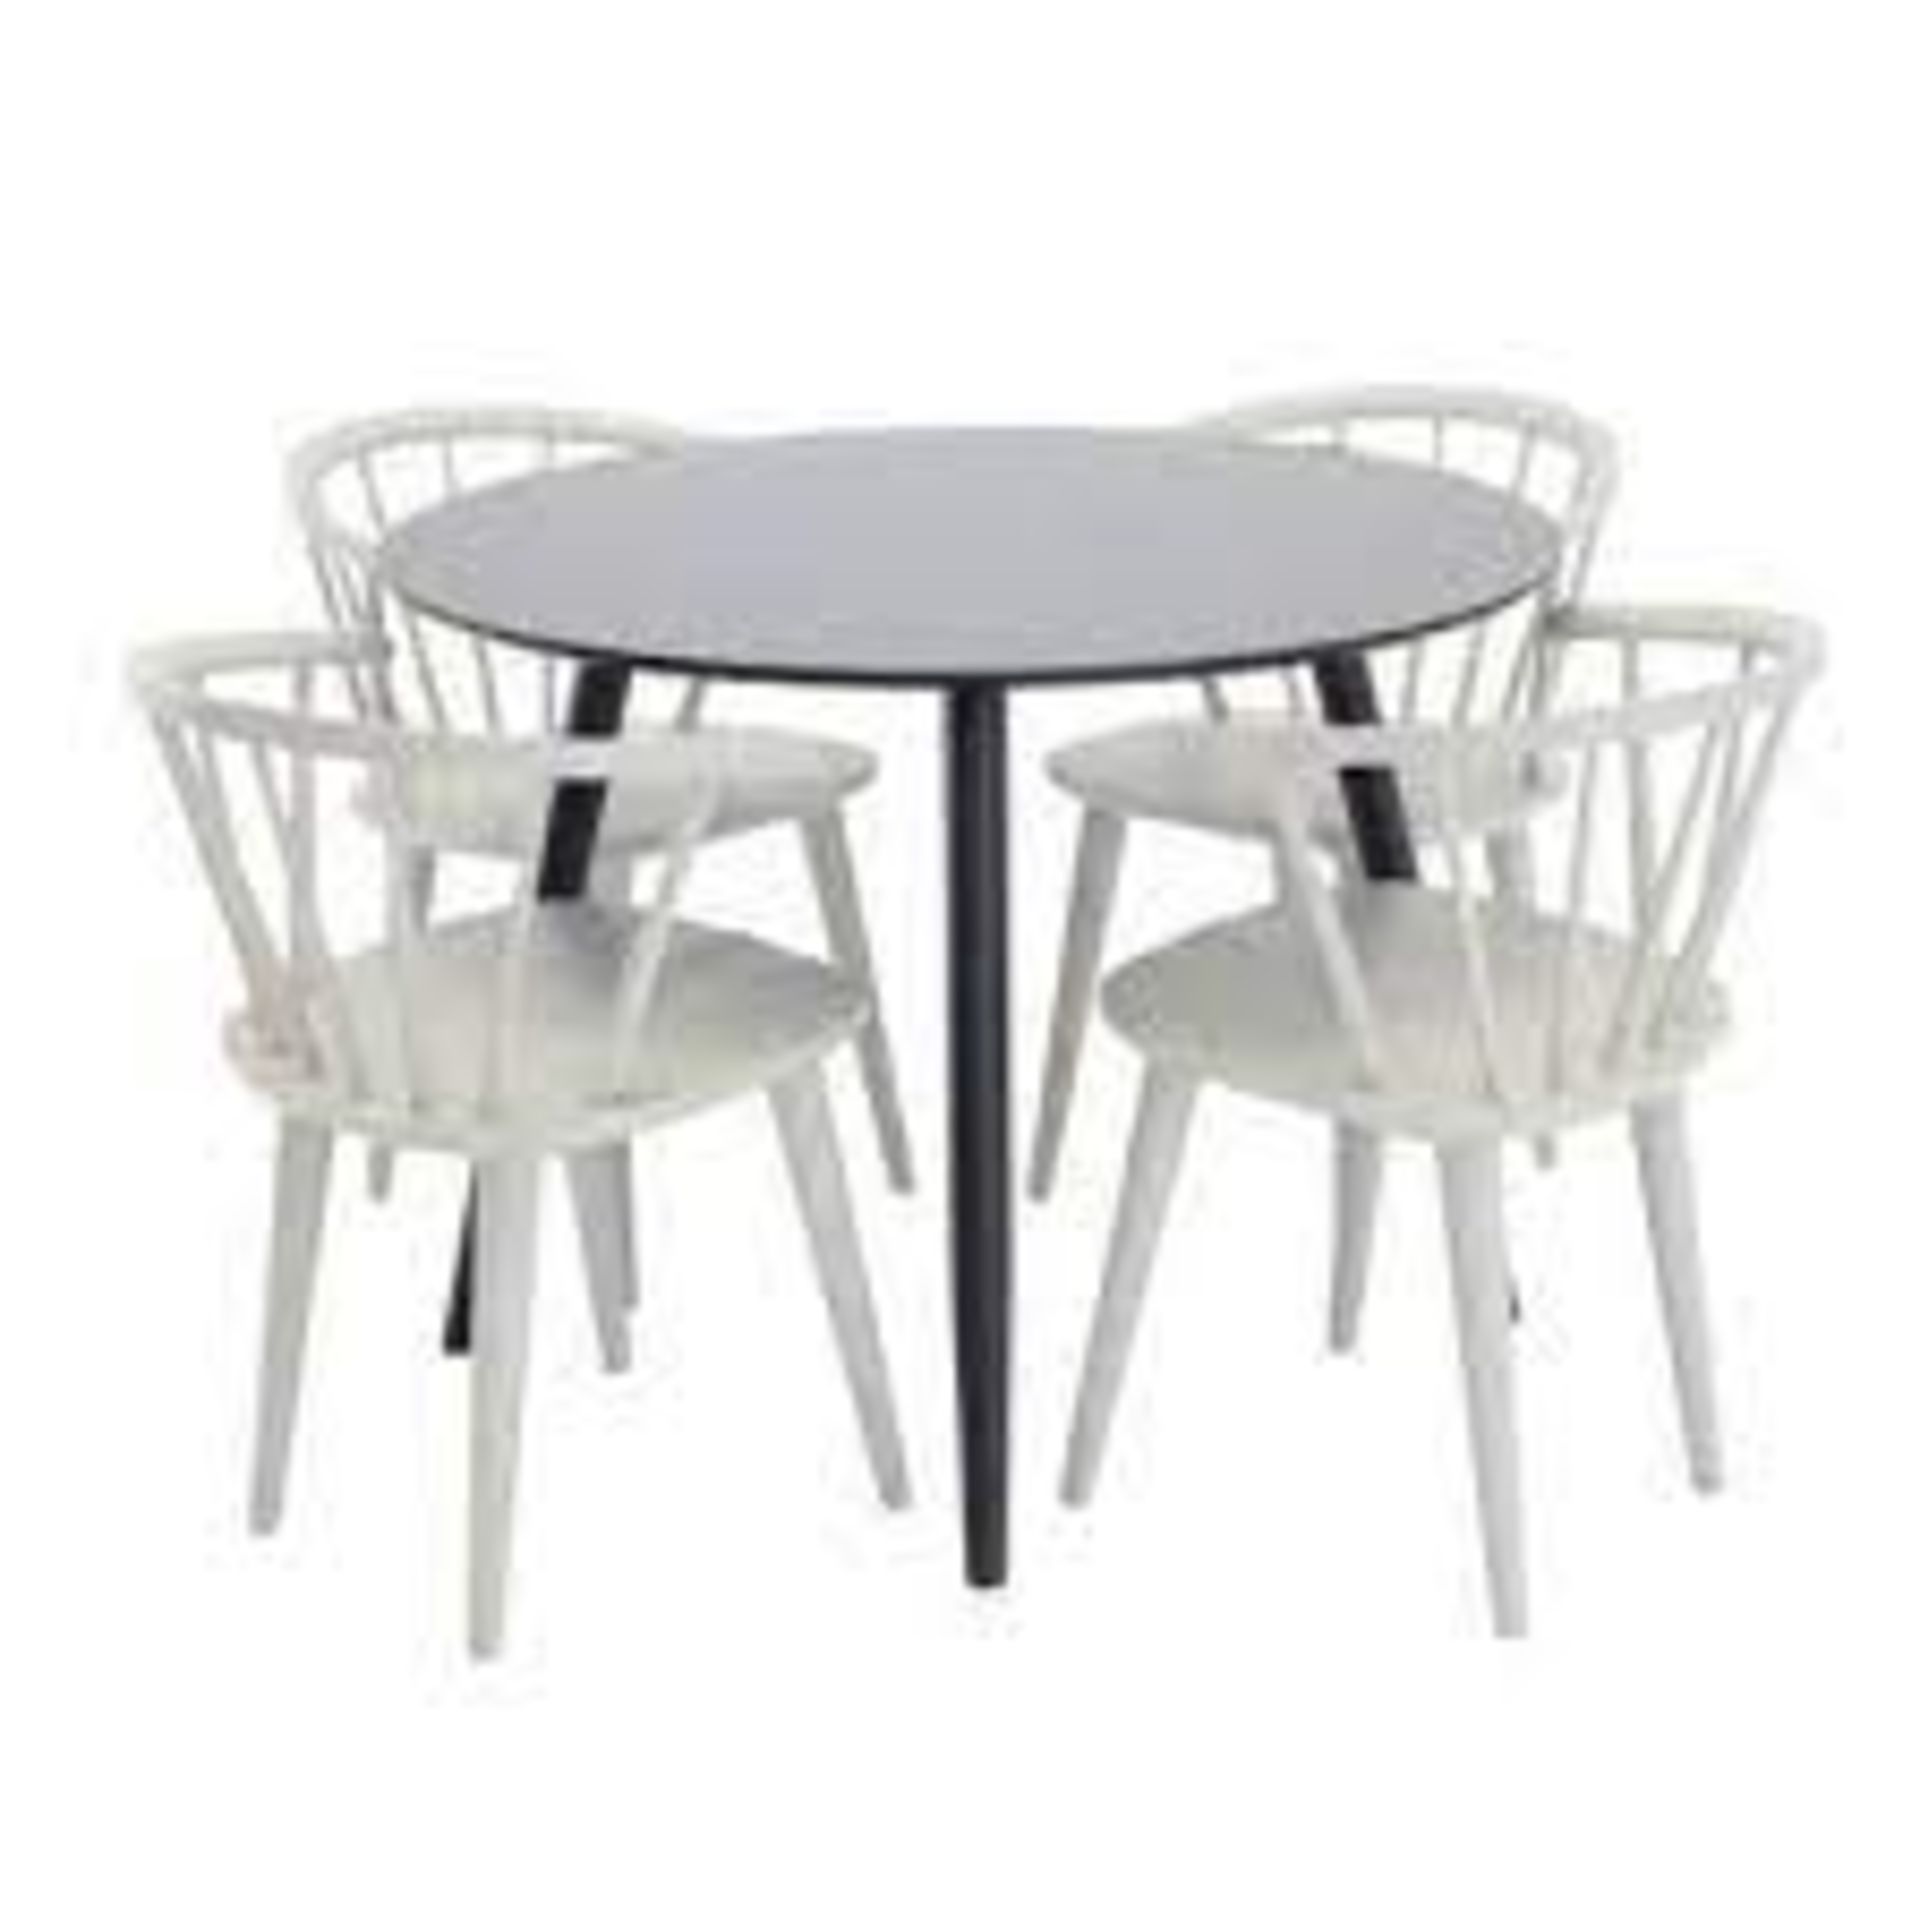 Metzger 4 - Person Chairs set. RRP £319.99. -U2